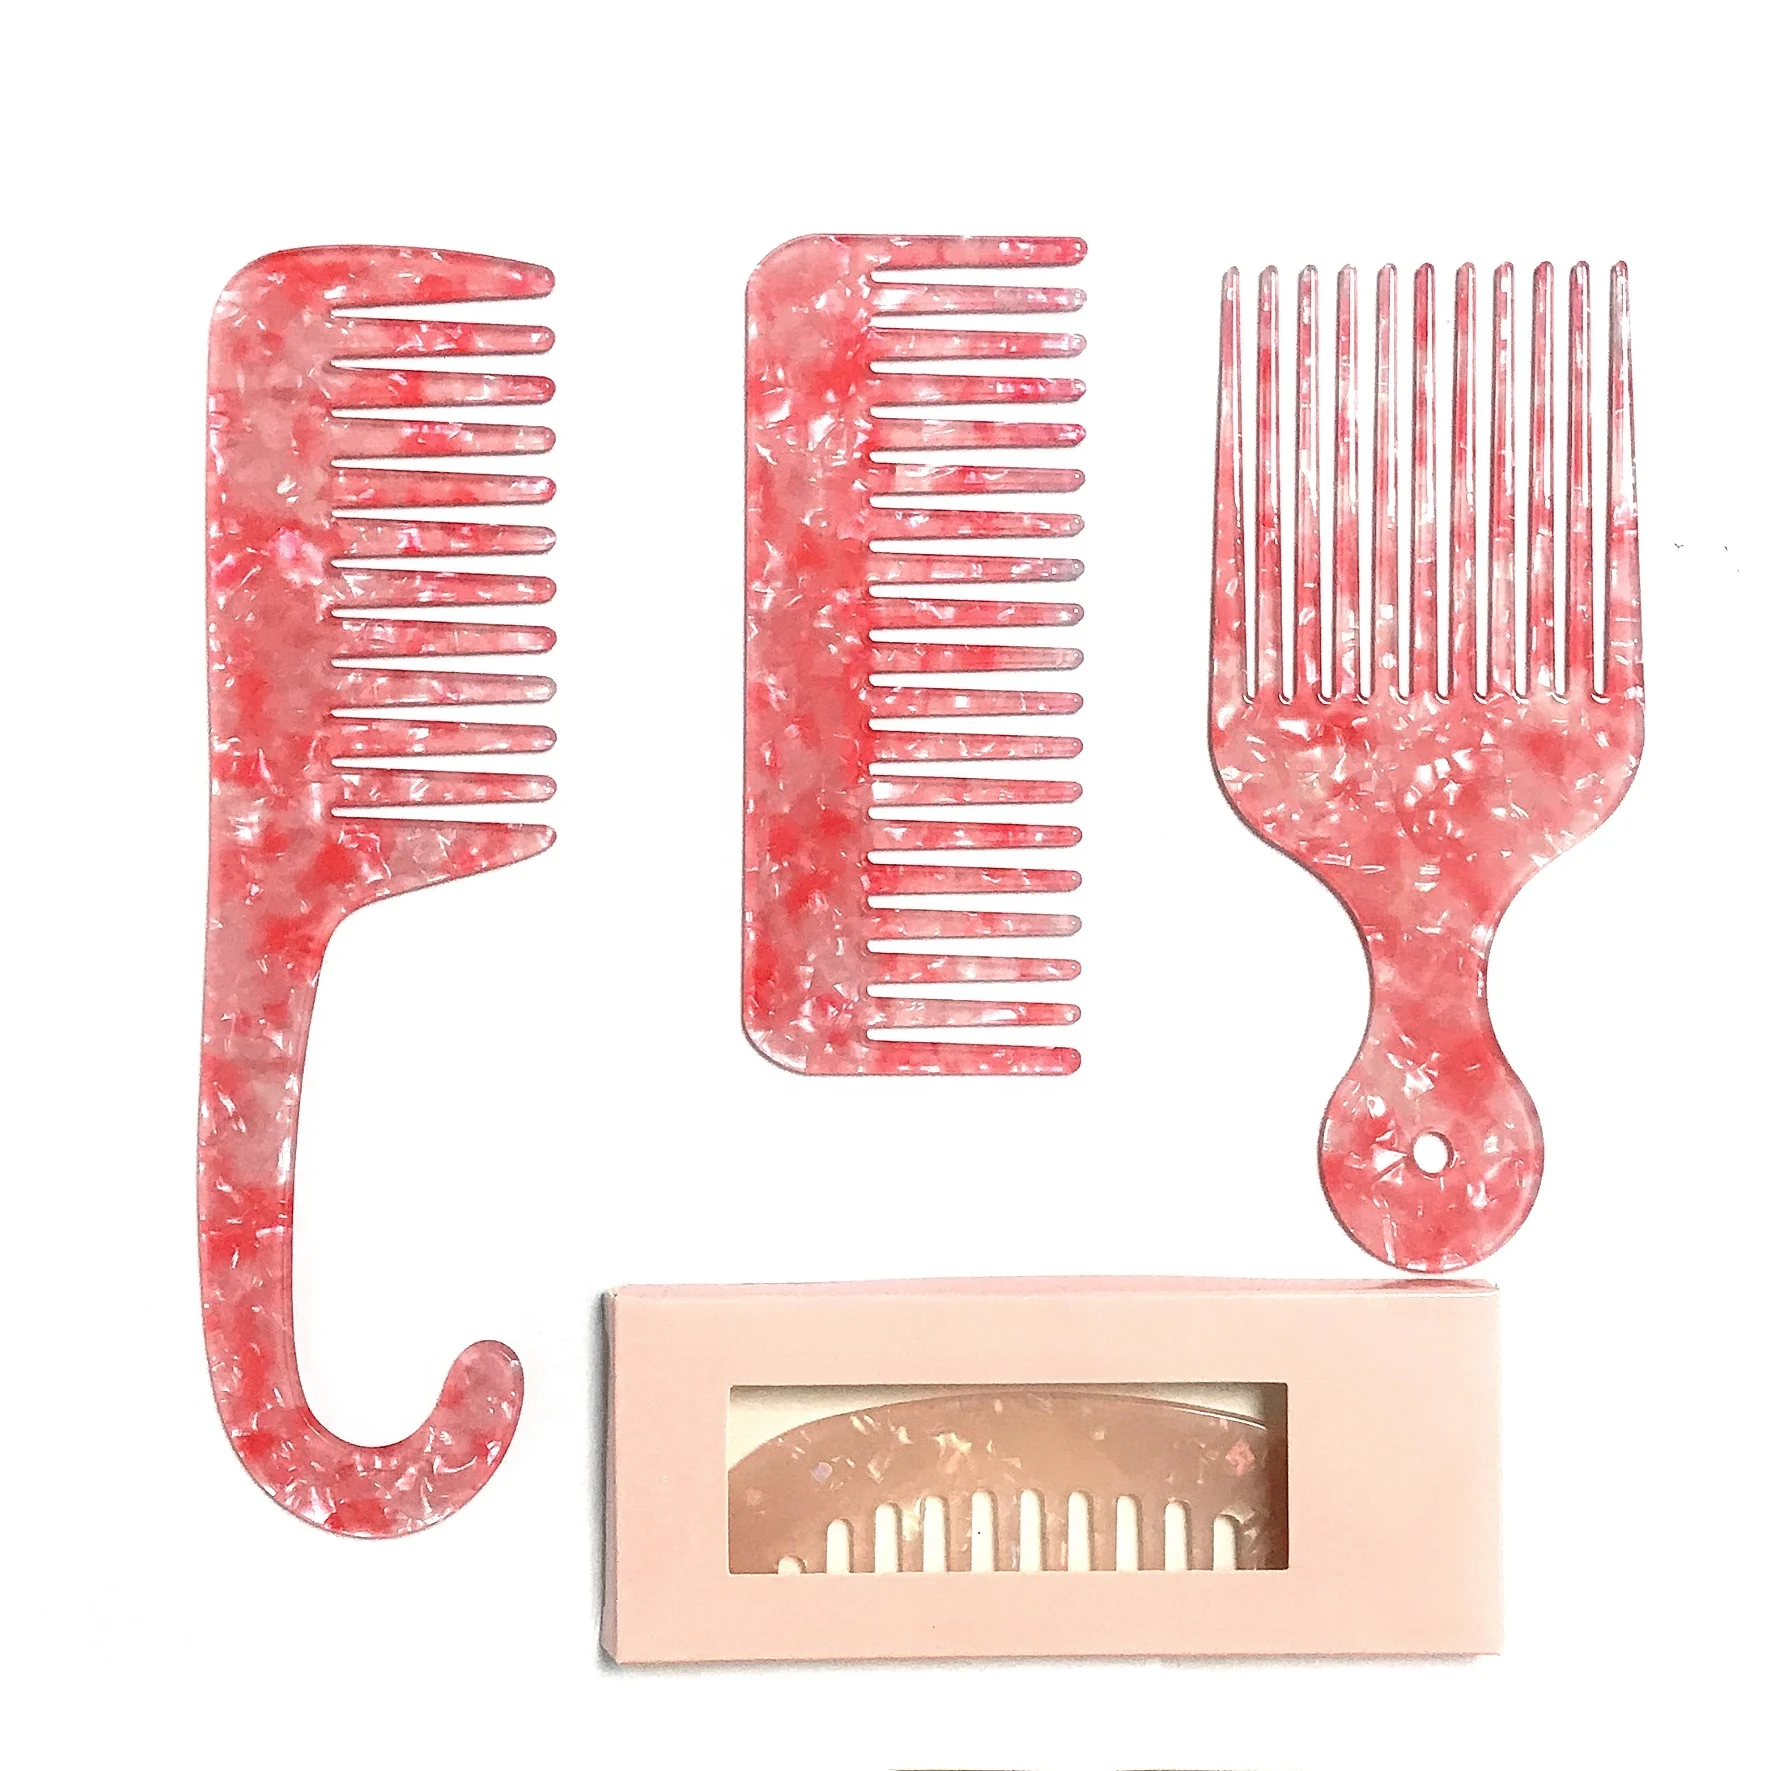 

Large Wide Tooth Combs Curved Hook Brushes Detangling Big Teeth Hairdressing Cellulose acetate comb, Picture